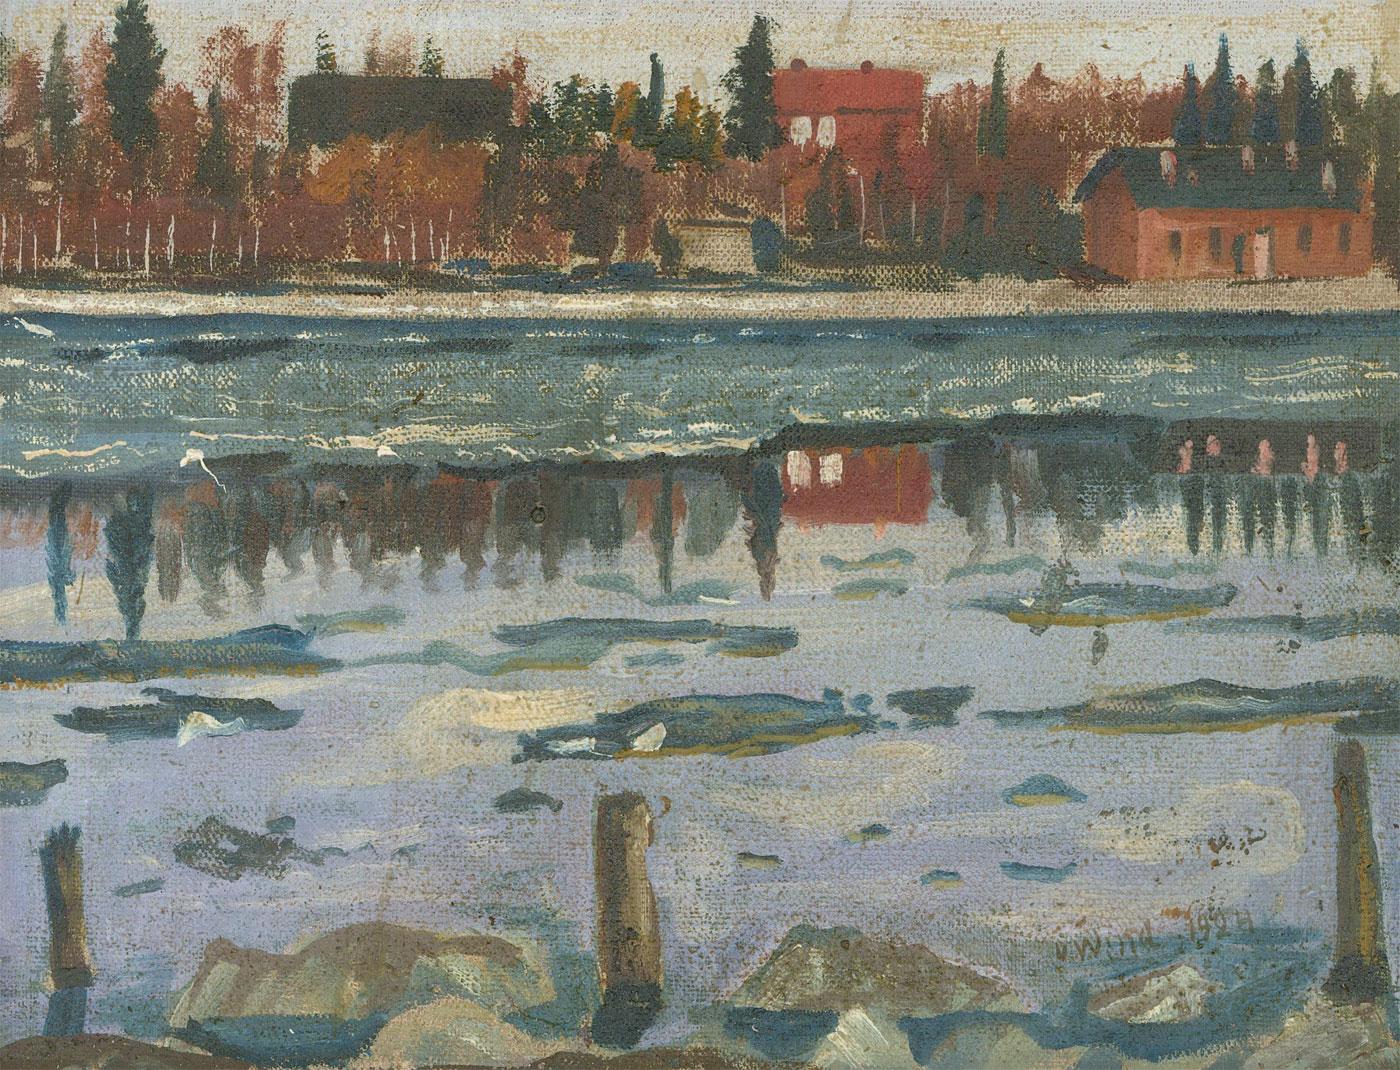 A delightful early 20th century oil painting, depicting a Nordic winter landscape. The lake looks ice cold but steadily moving, with a shimmering reflection of the chalet like houses on the surface. Snow can be seen covering the ground outside